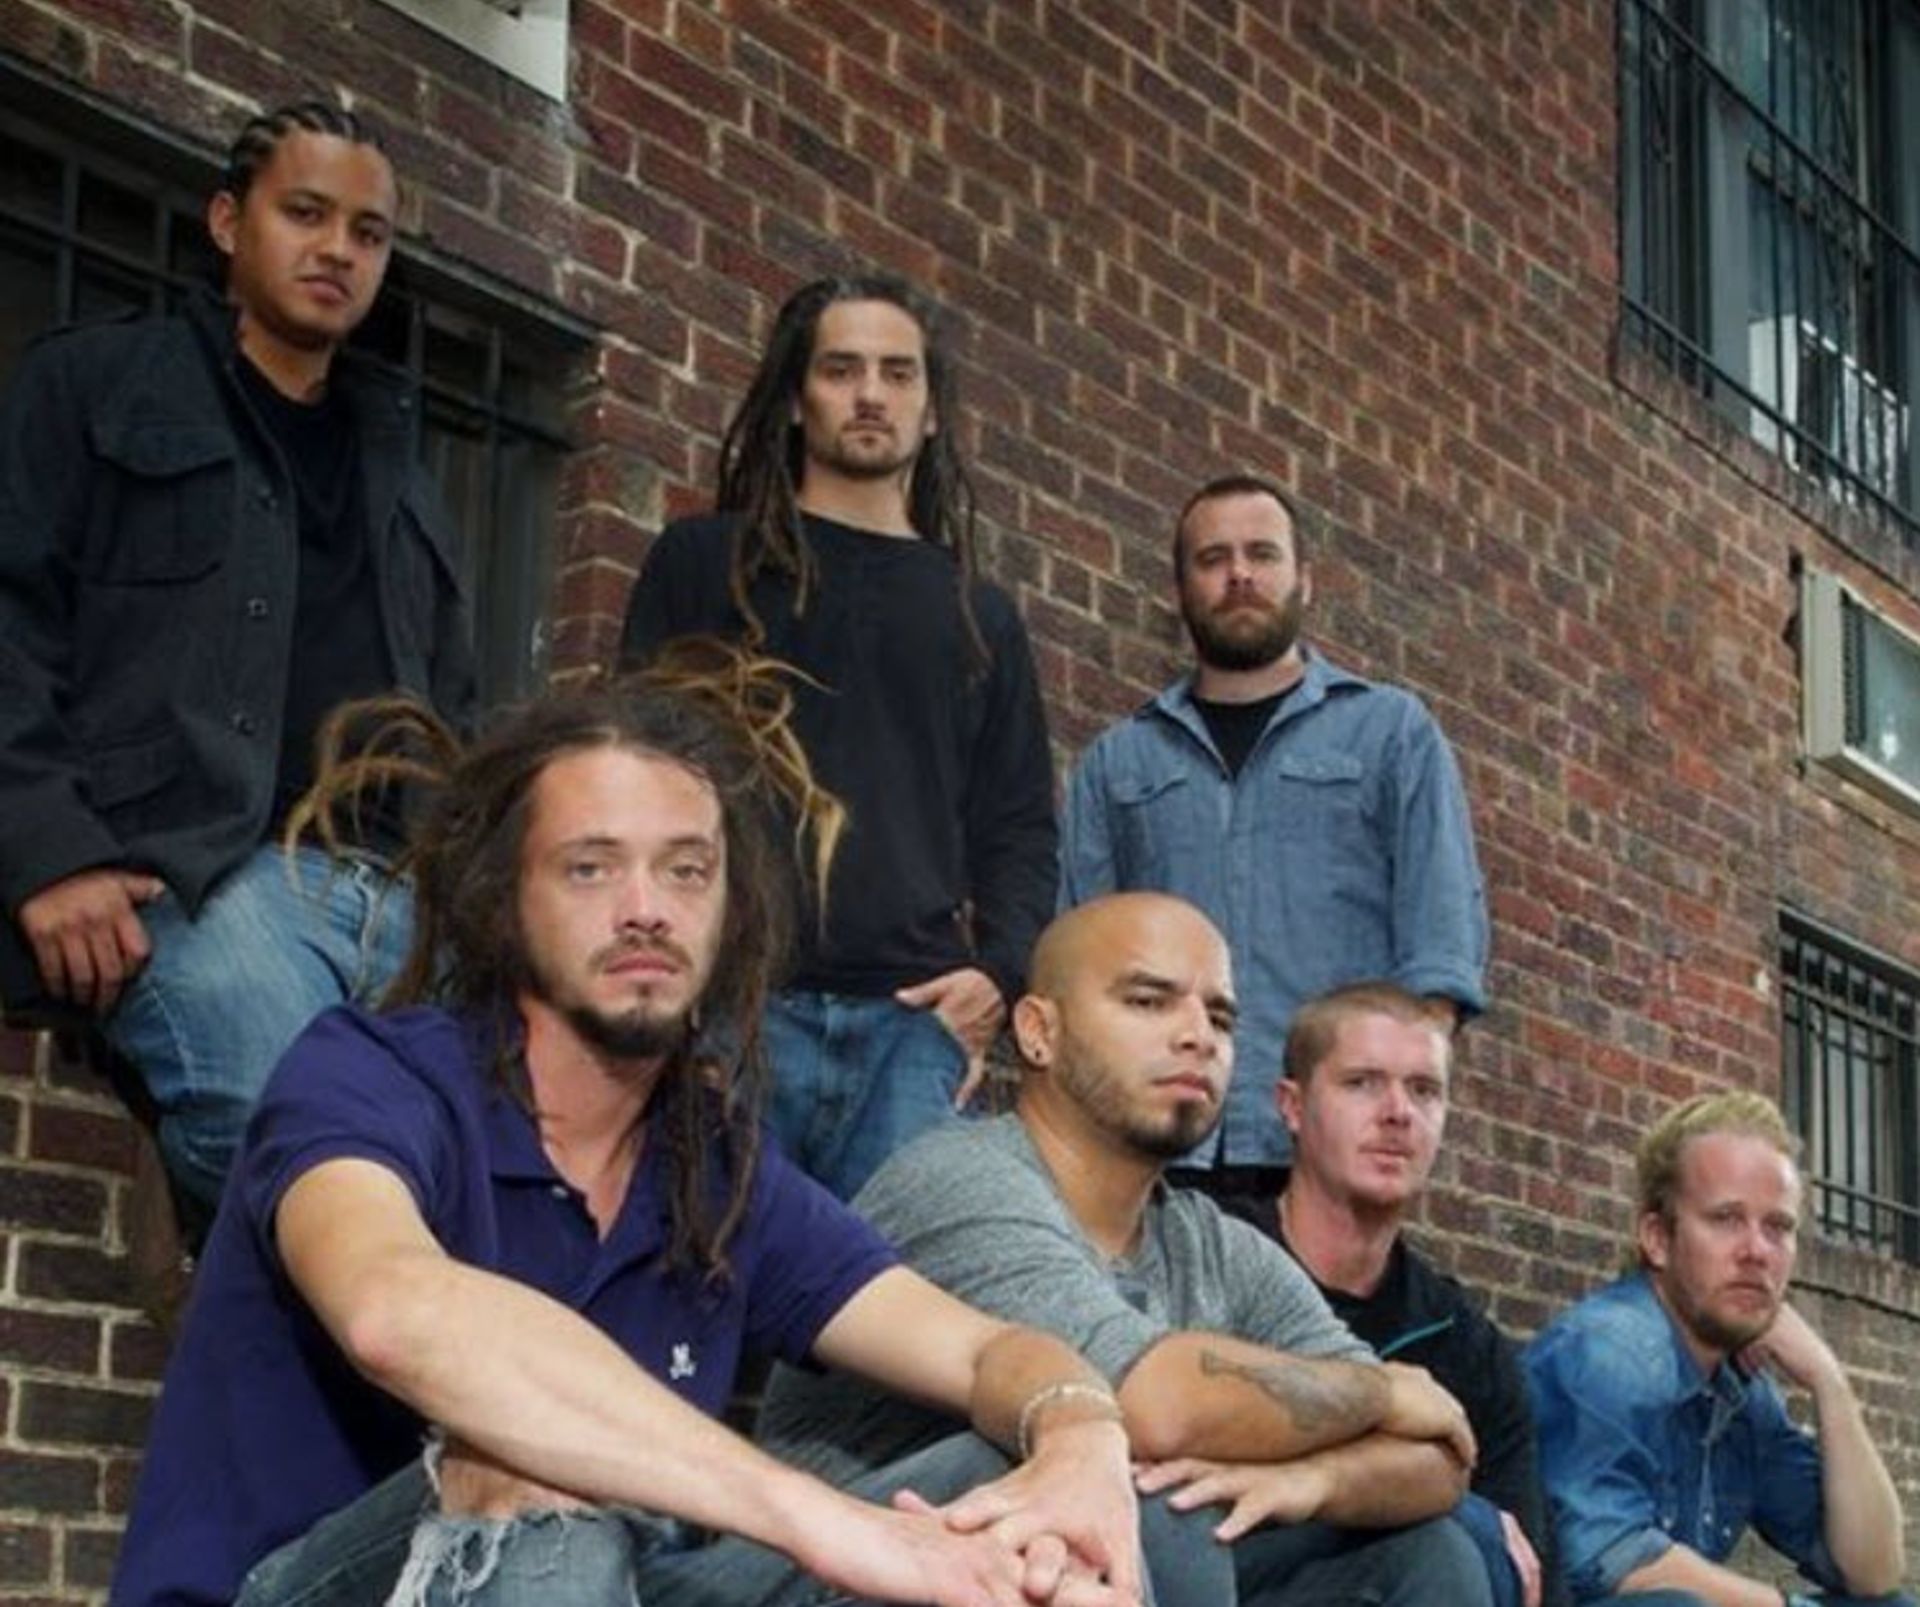 What&#8217;s Soja have to do with rehabbing homes?